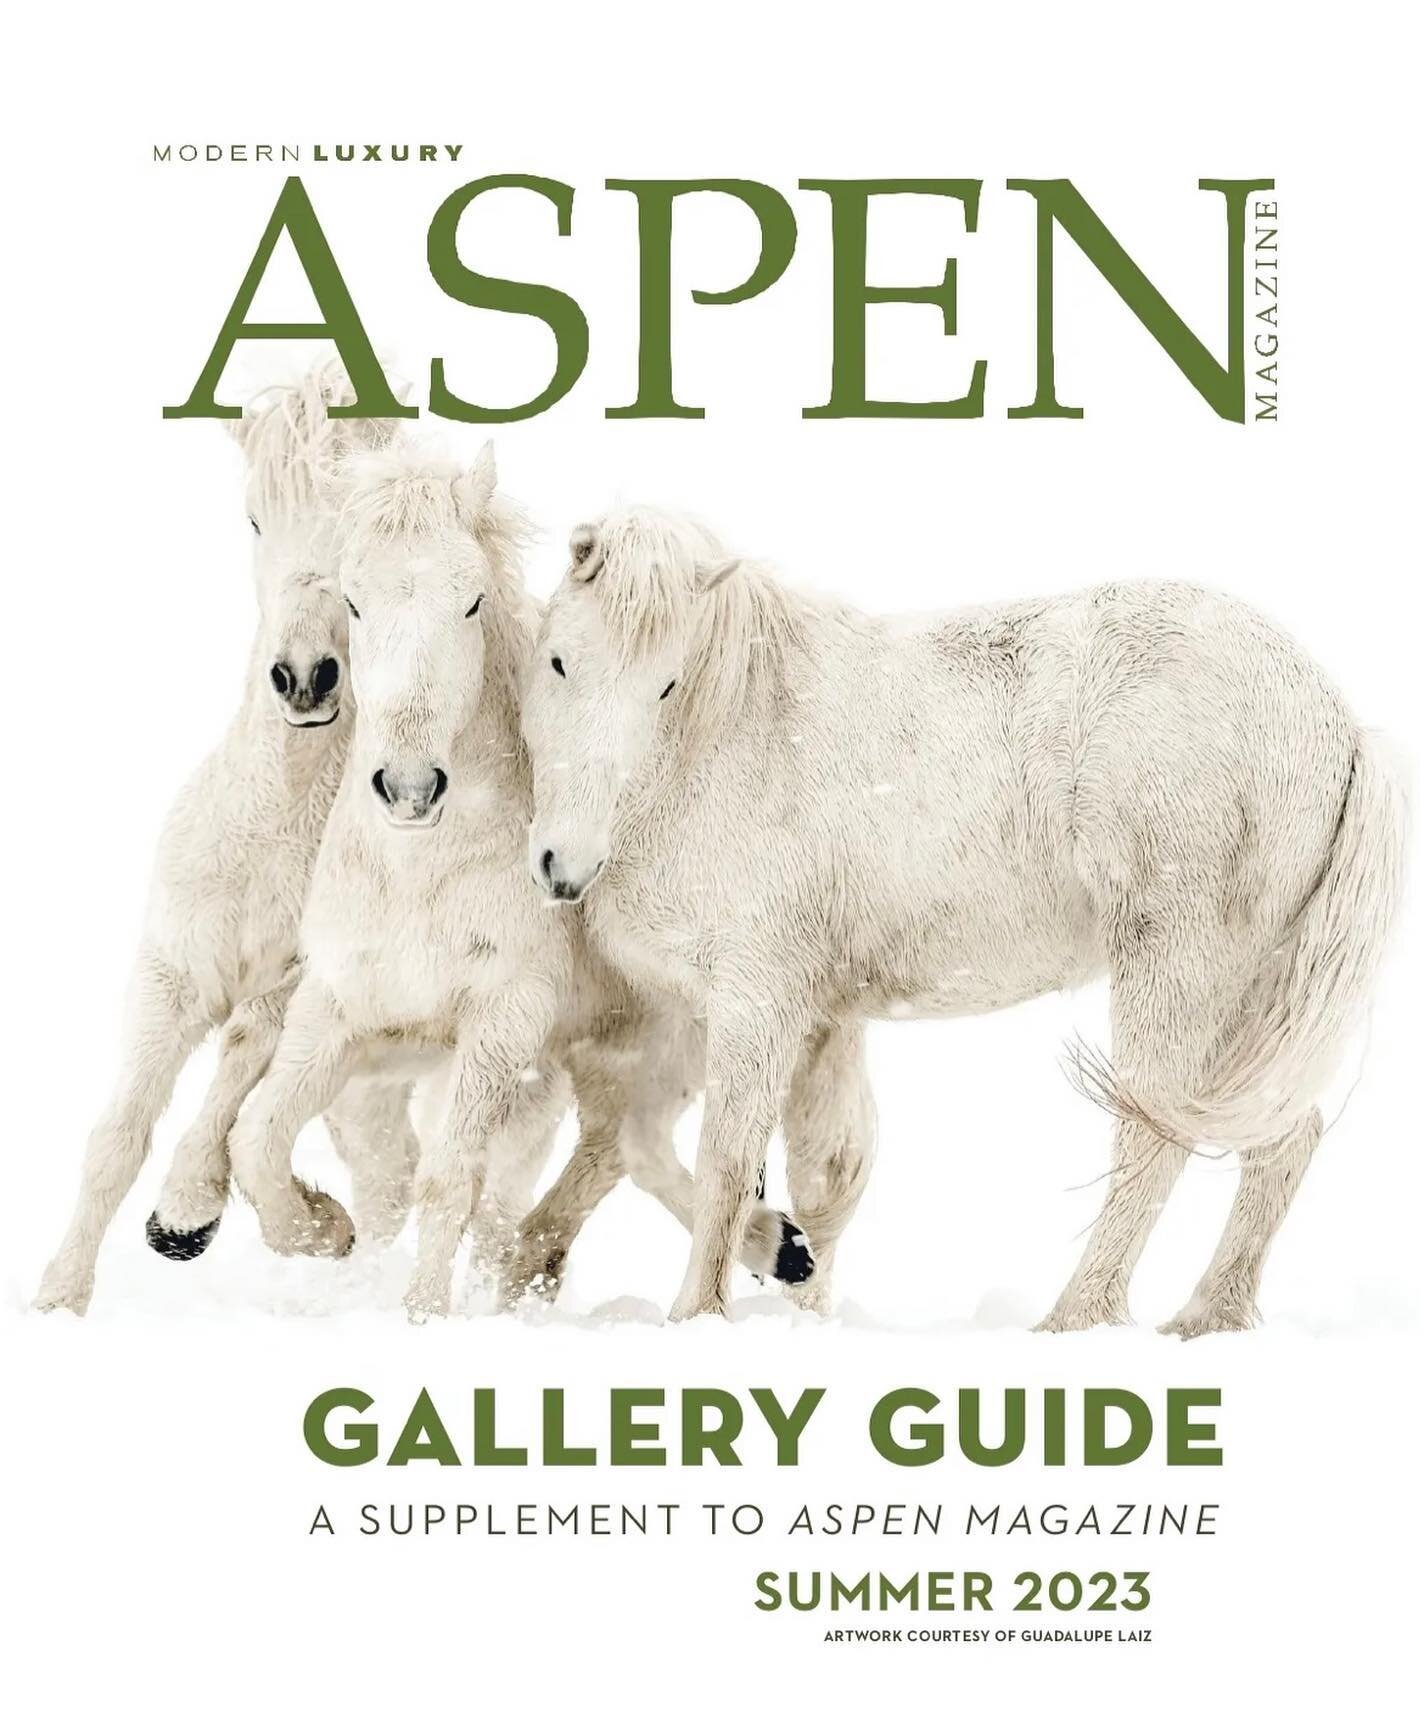 Thank you for the honor @aspenmagazine